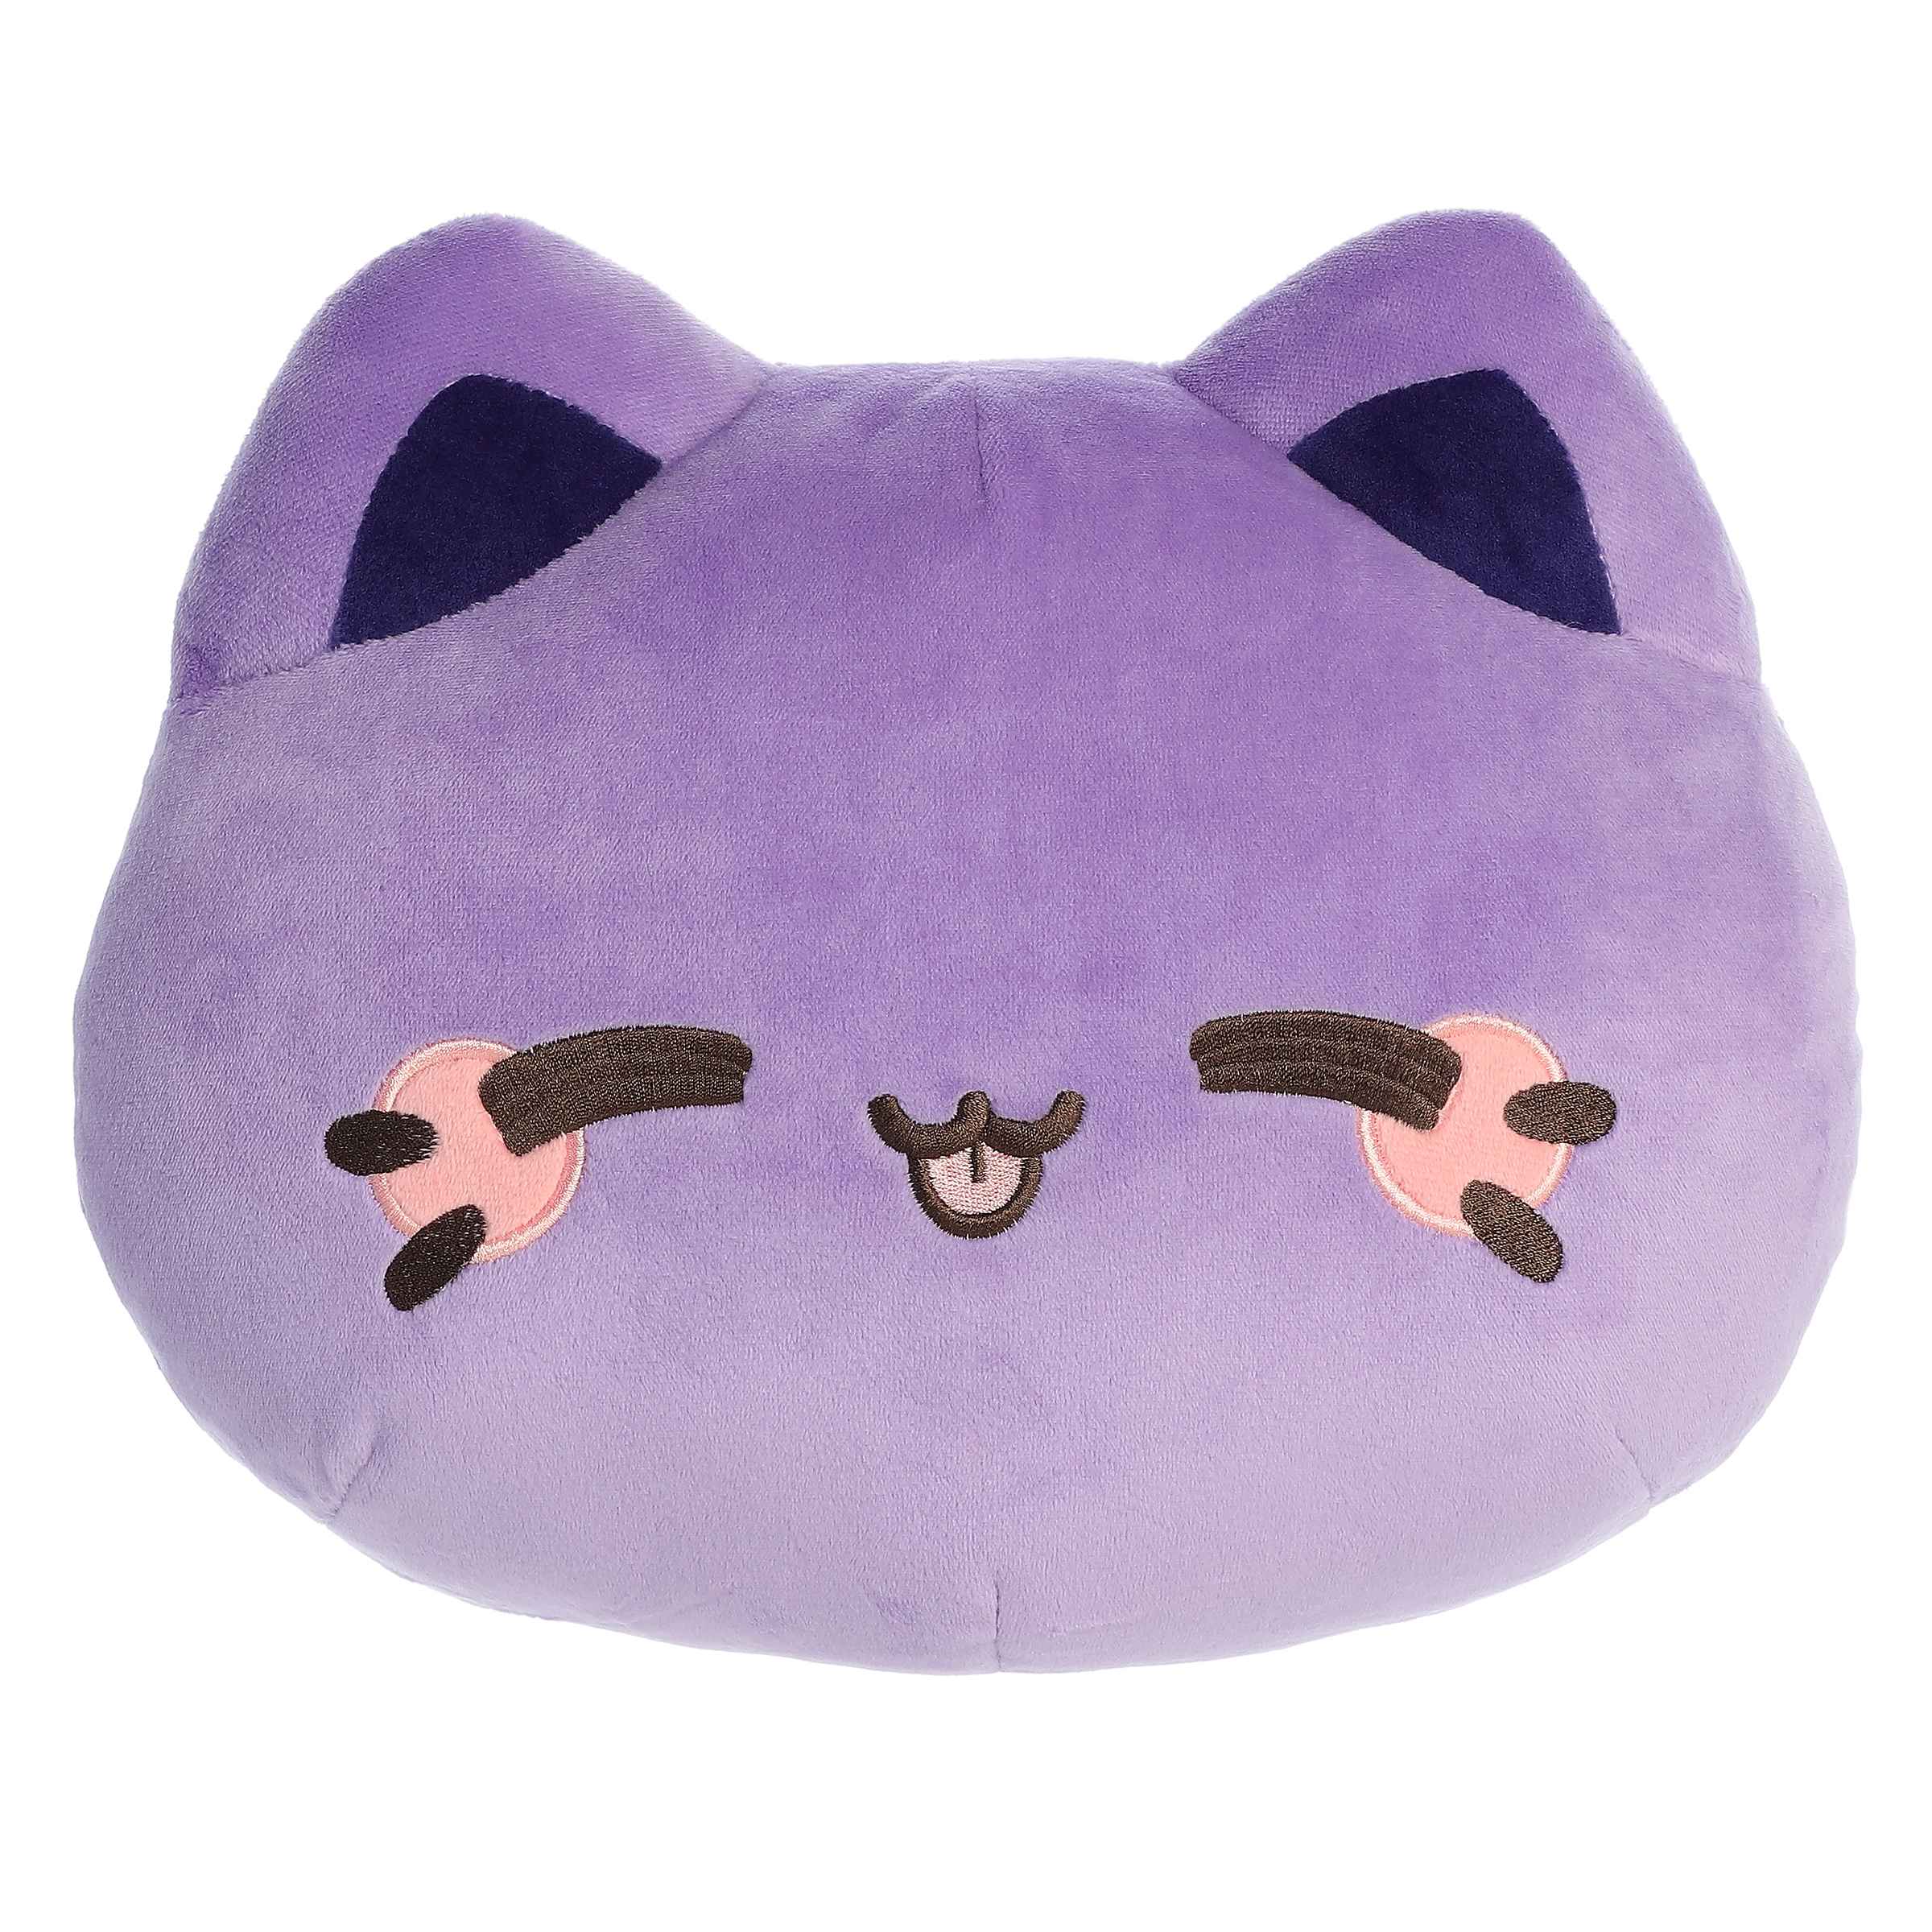 Ube Meowchi Face Plush from Tasty Peach, purple-hued plush pillow, adorable whiskered smile, perfect for kawaii collection